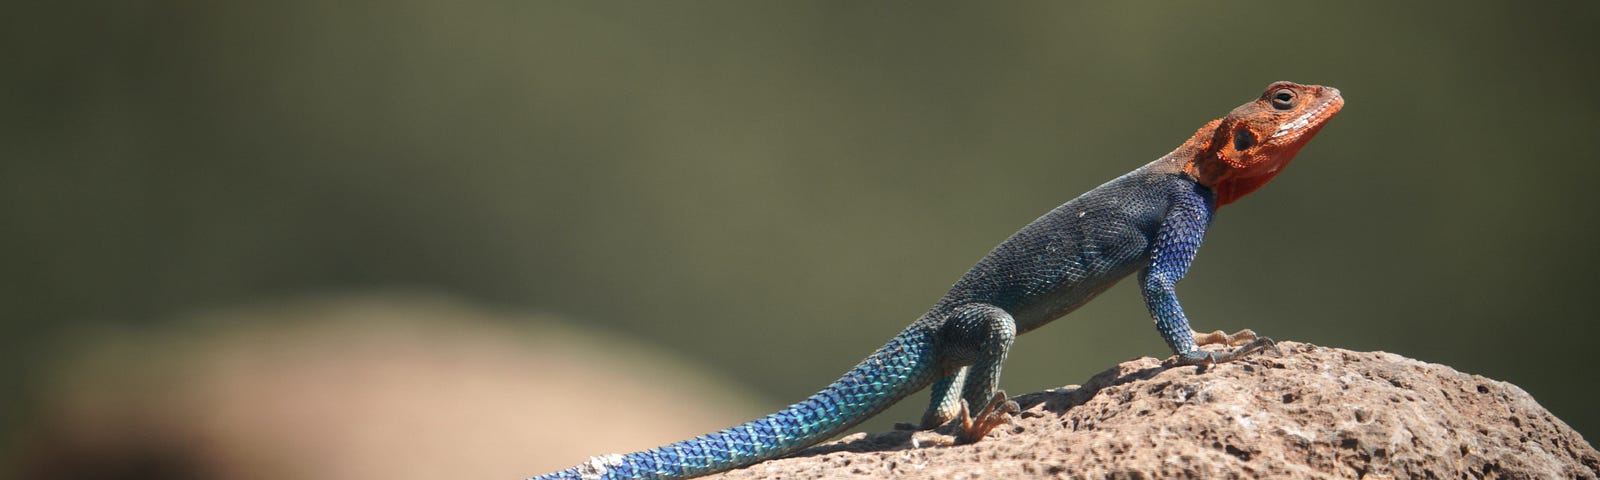 Profile of a lizard with a blue body and red head